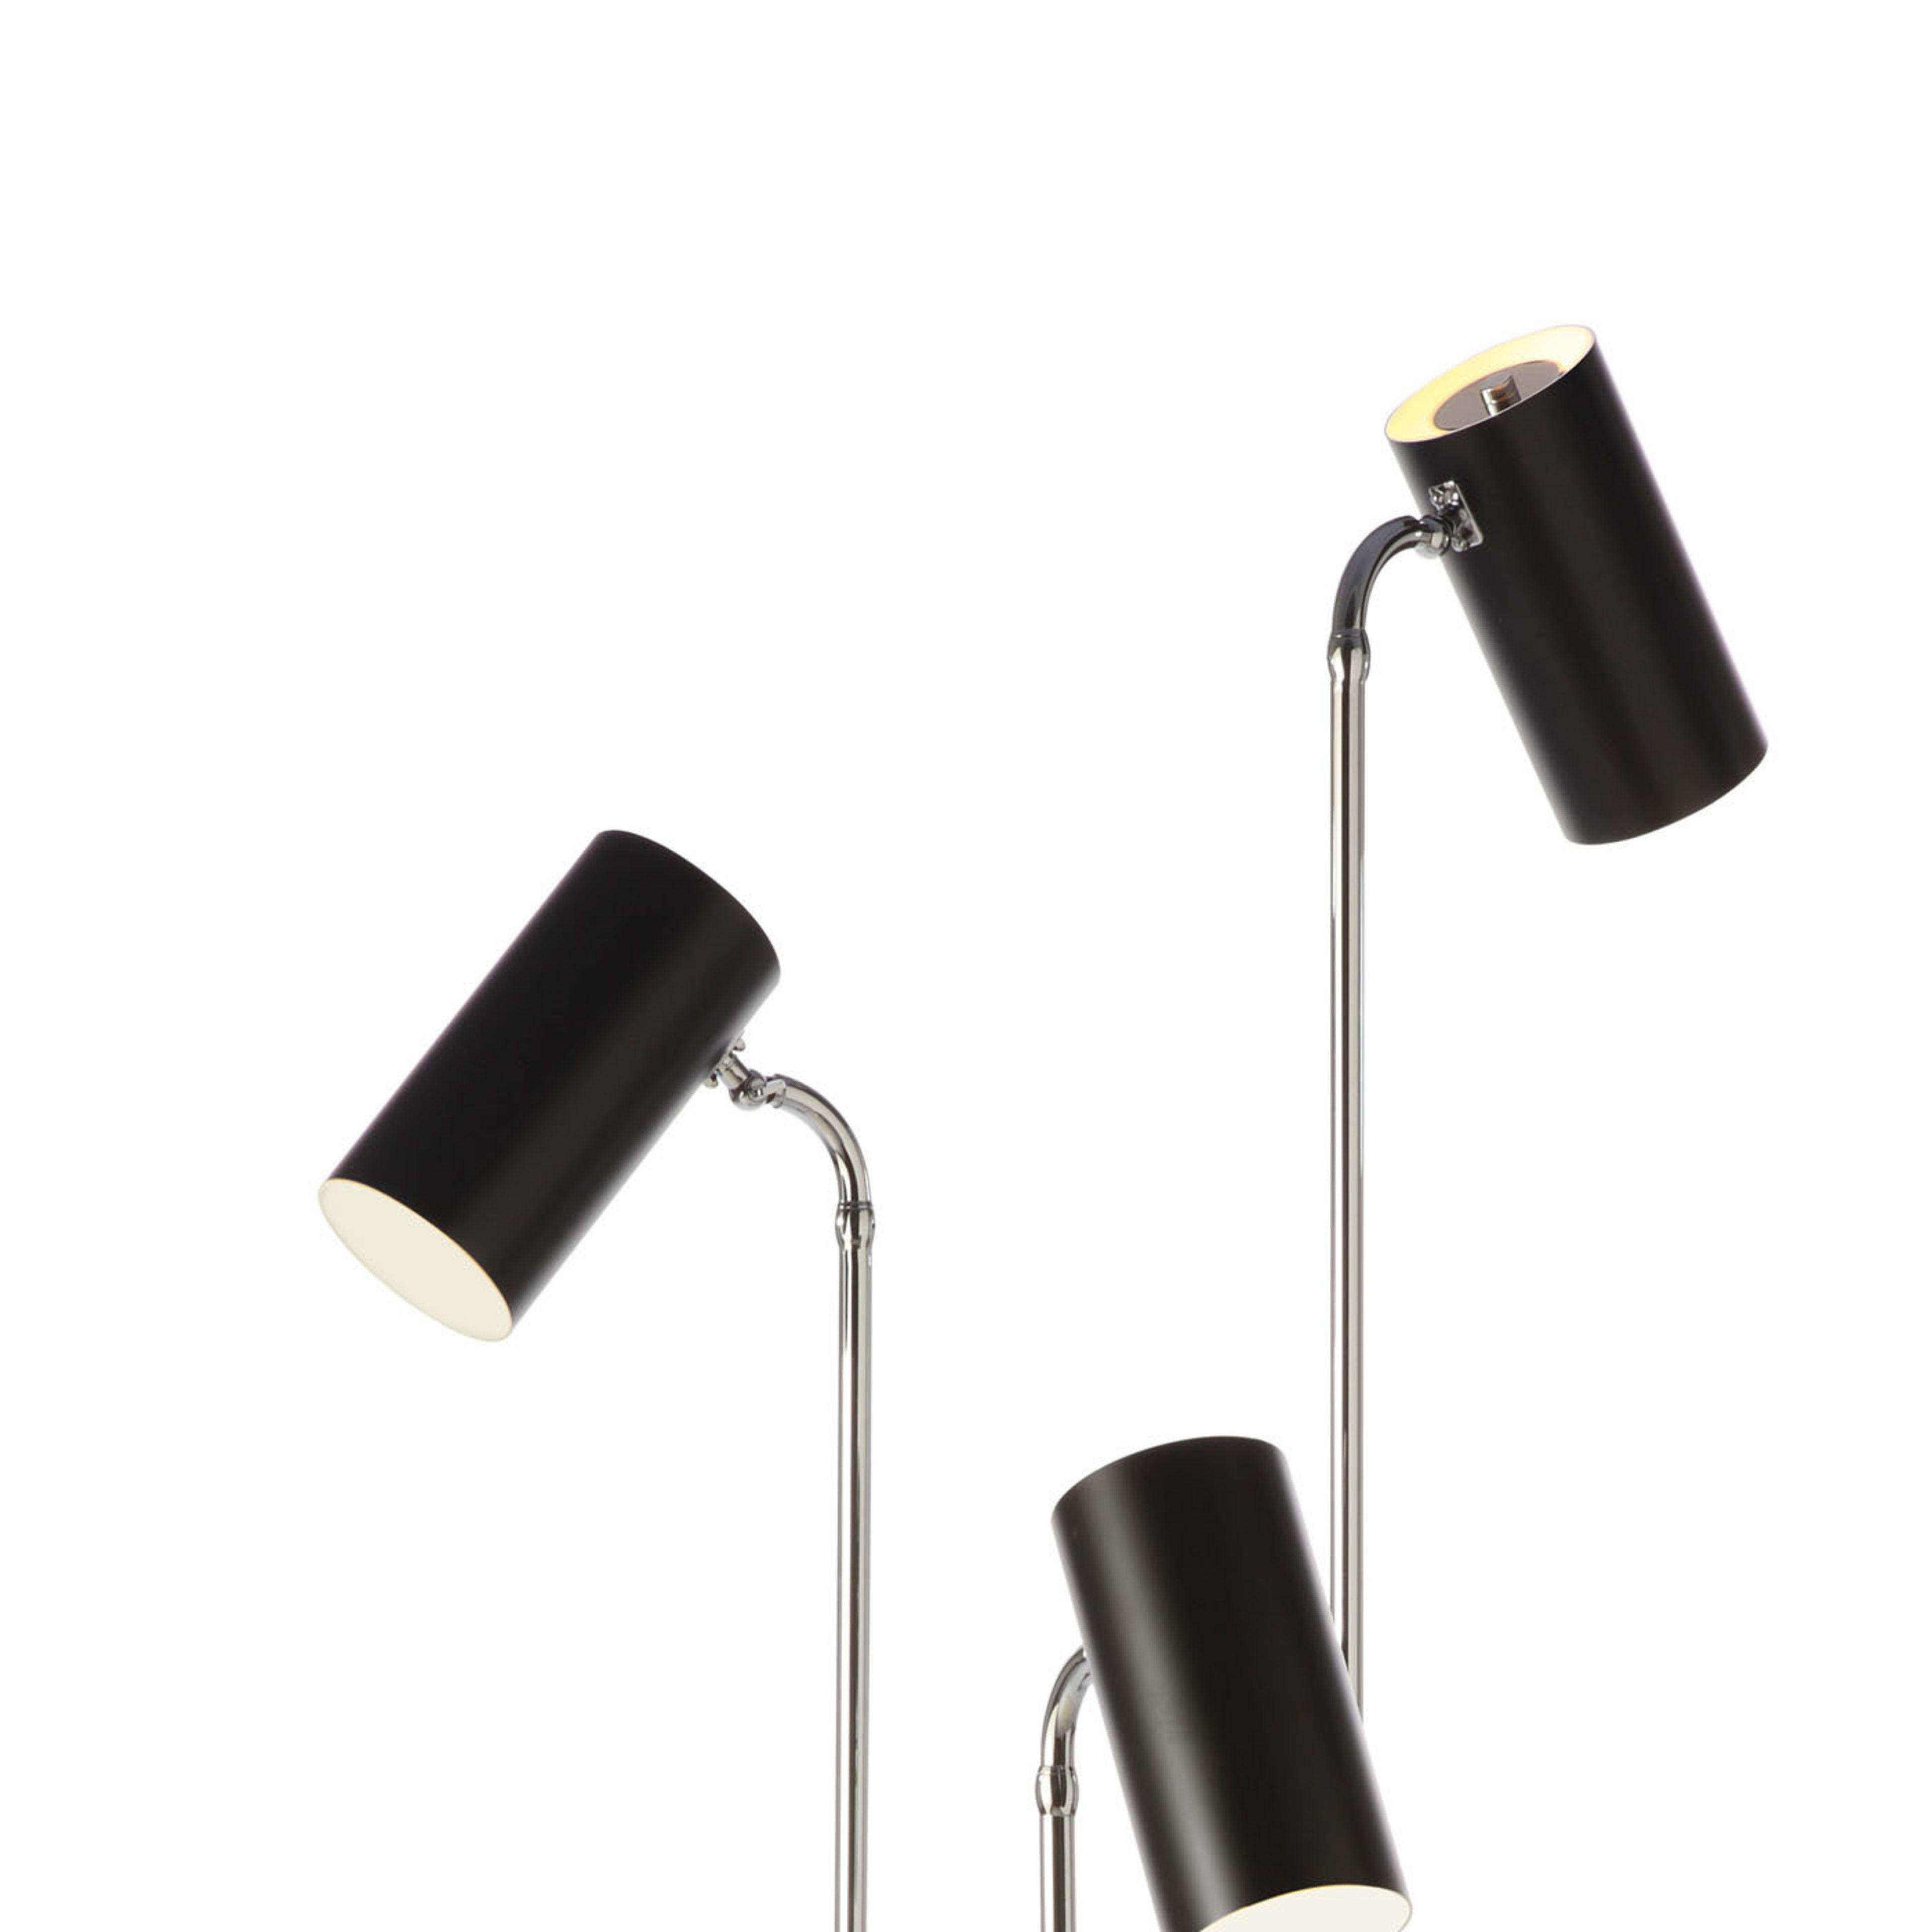 This striking floor lamp is entirely made in metal and features a cylindrical base finished with a black varnish resting on a round chromed support. From the base, three chrome-finished metal shafts sprout like modern stems of flowers and curve at